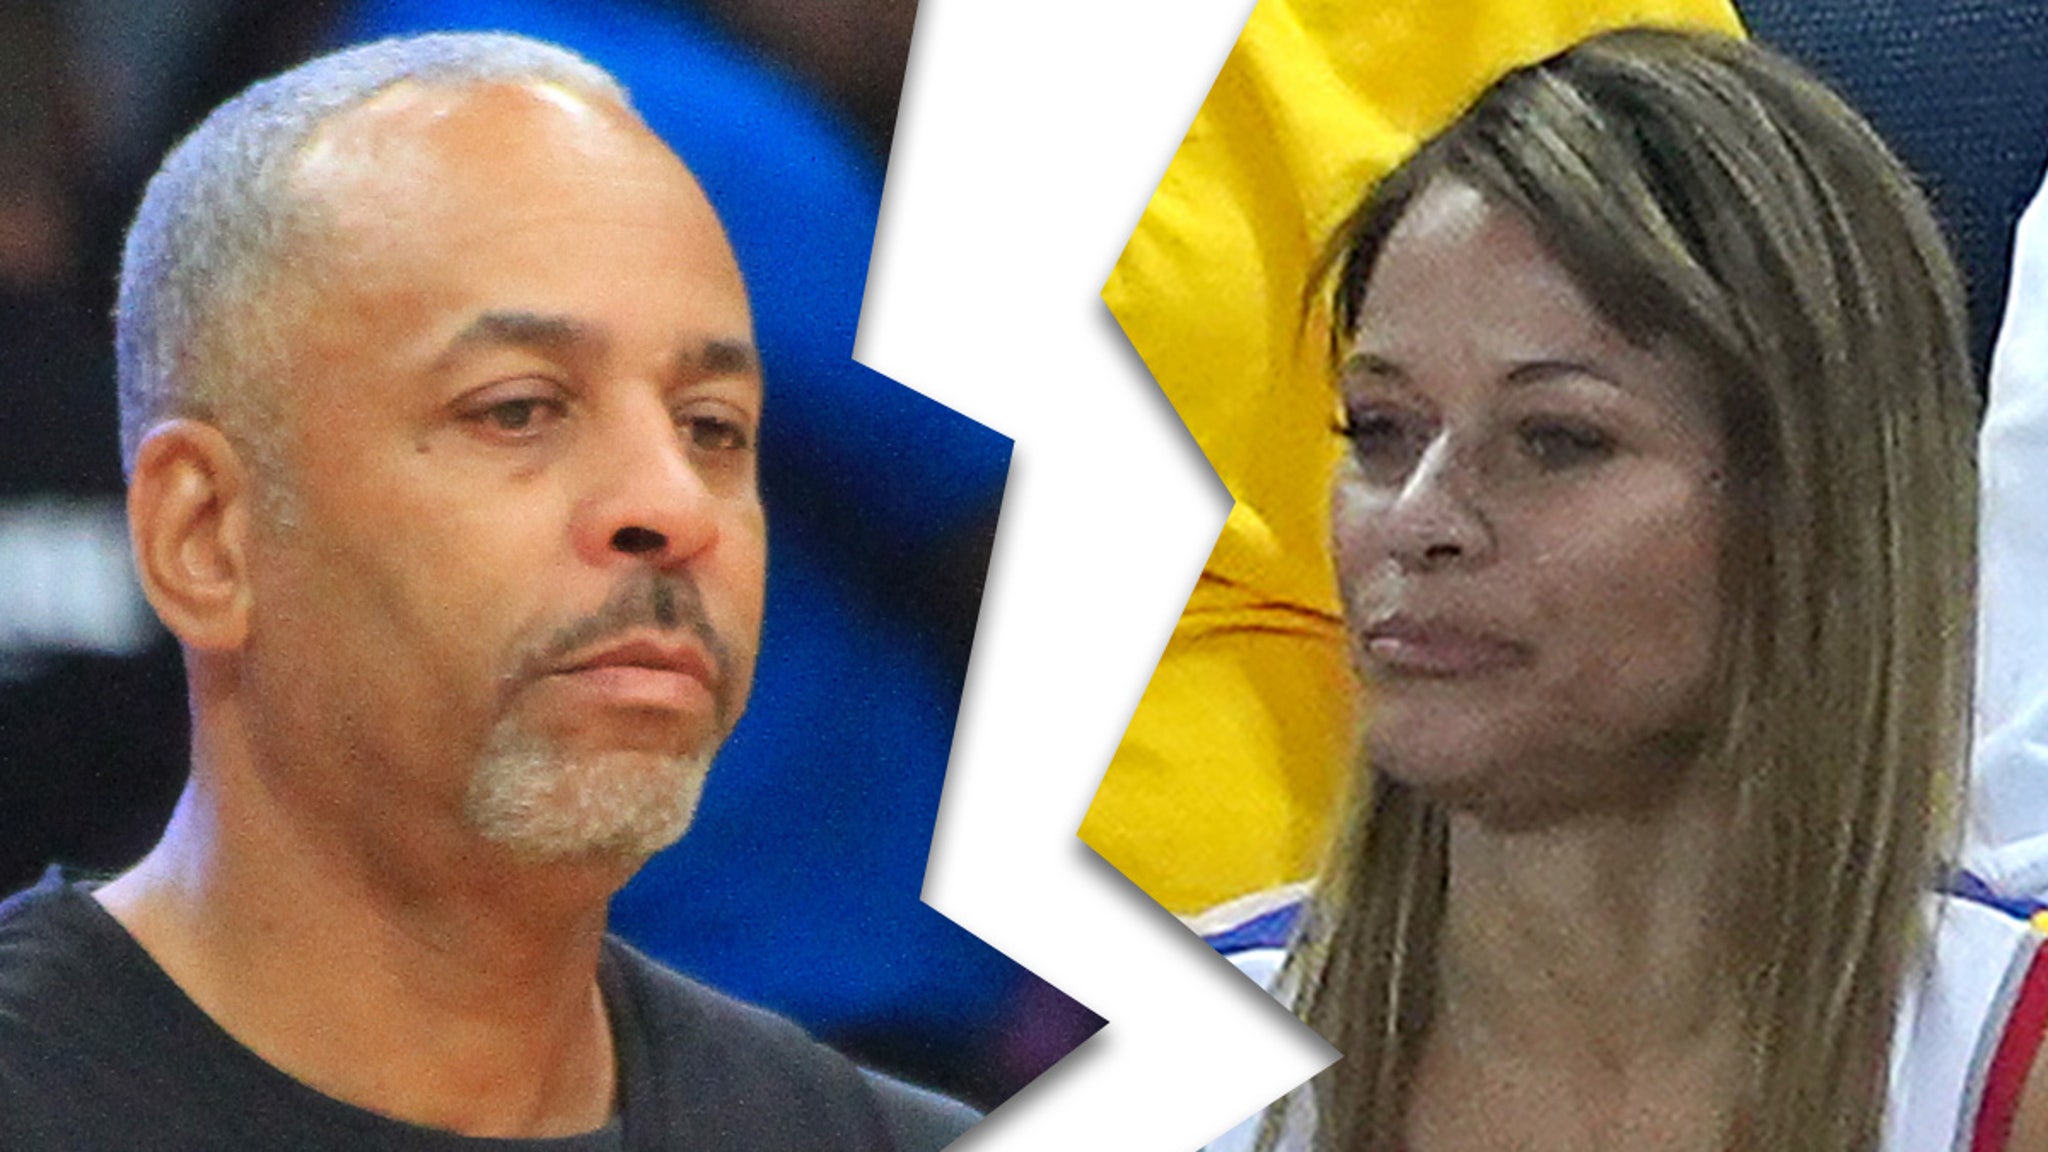 Steph Curry's Parents, Sonya and Dell, Accuse Each Other of Cheating in Divorce ..